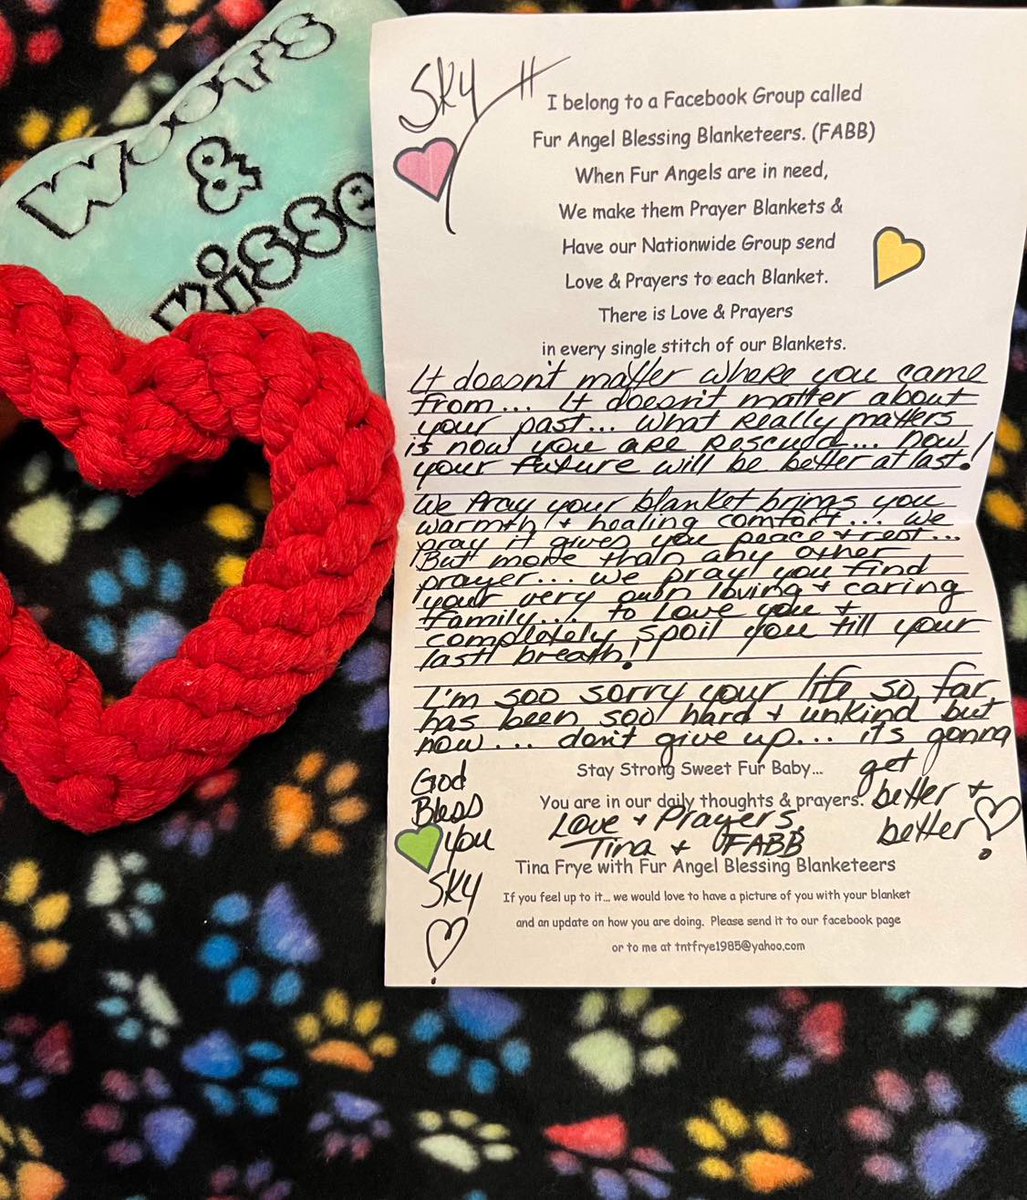 SKY got a Prayer Blanket from Fur Angel Blessing Blanketeers! 🙏🥰 From ThisisHouston: We love receiving prayer blankets for our babies! Majority of our pups get these beautiful handmade blankets with love & prayers in every stitch from Fur Angel Blessing Blanketeers (FABB).…